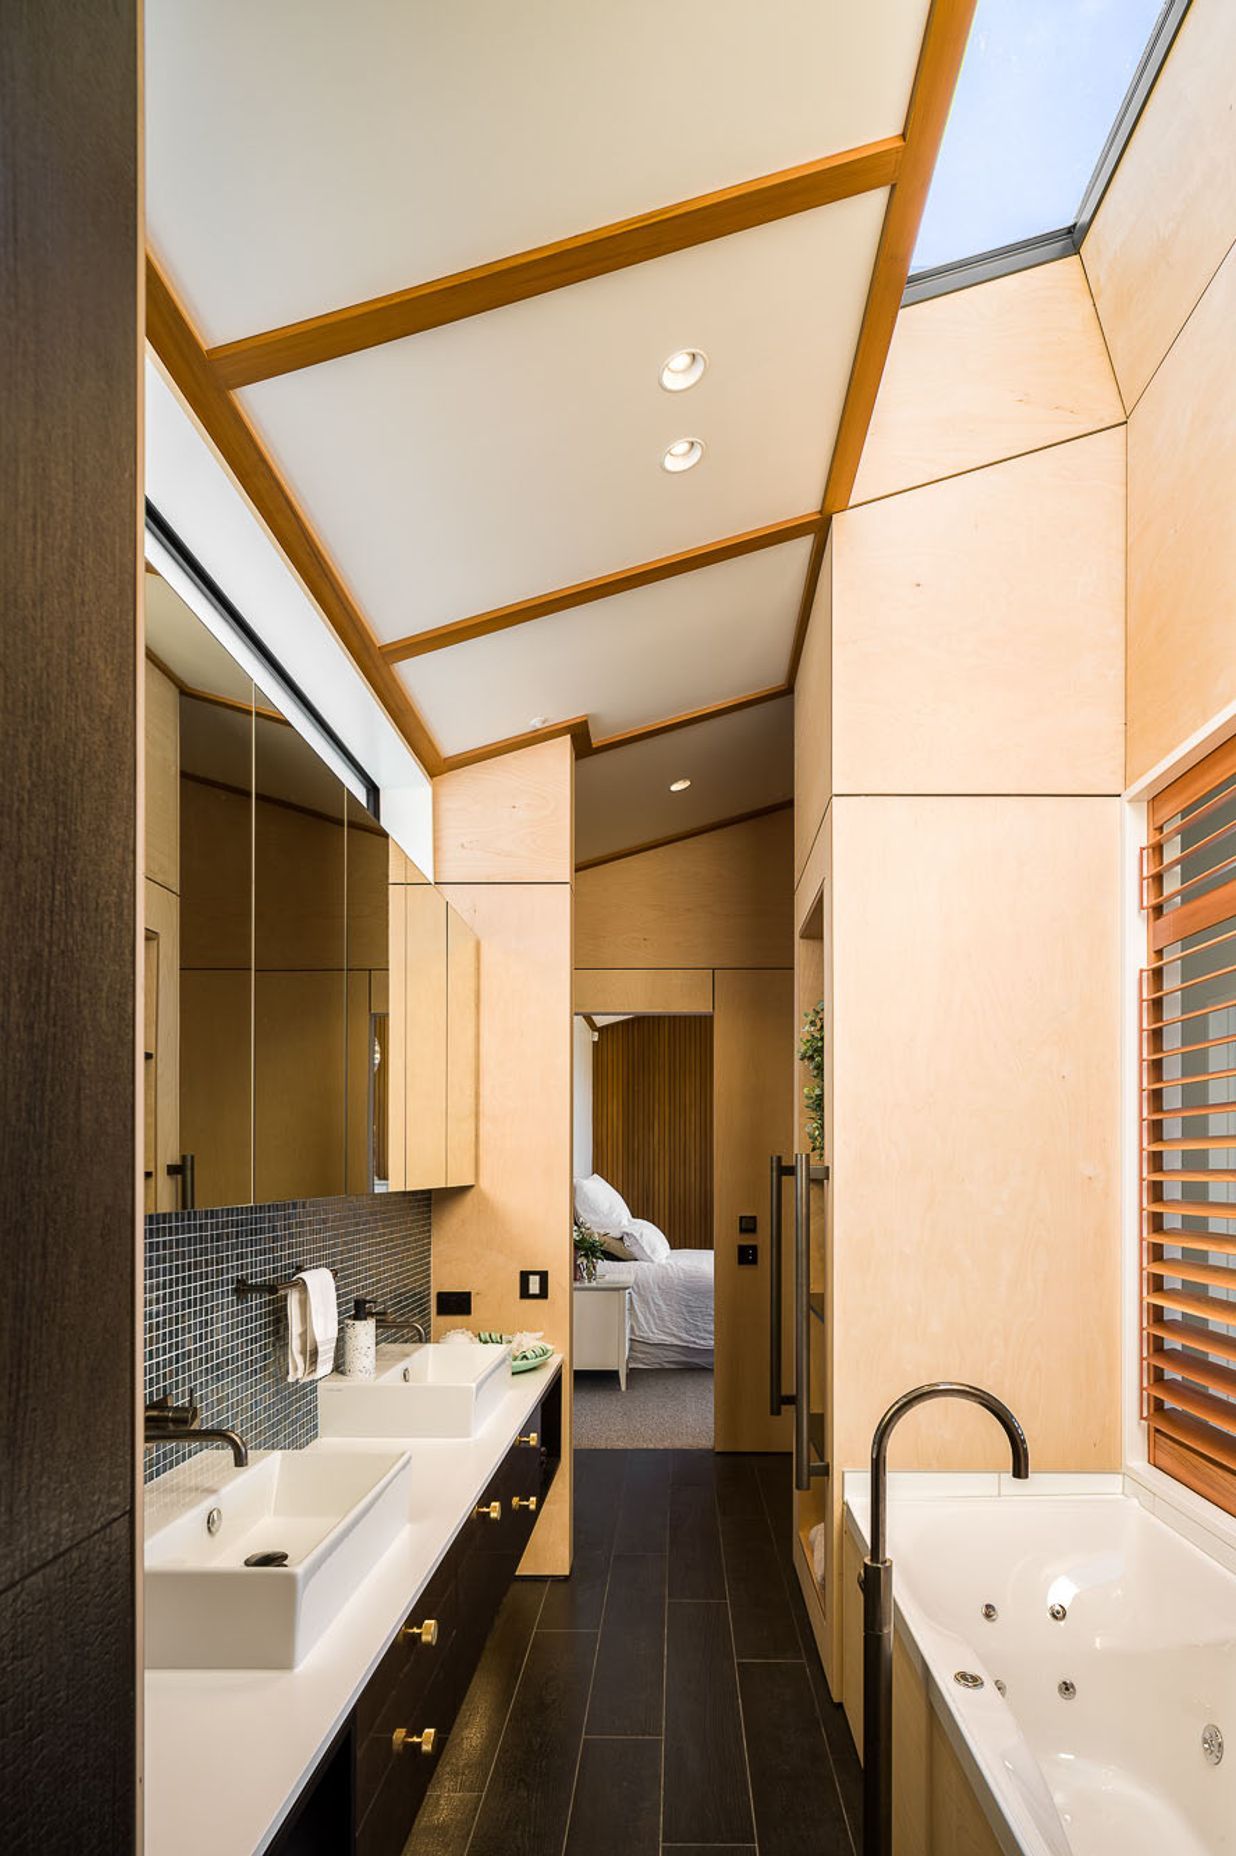 Located behind the break-out space, the ensuite uses a mix of clerestory and internal windows, as well as a skylight to bring light into the space.